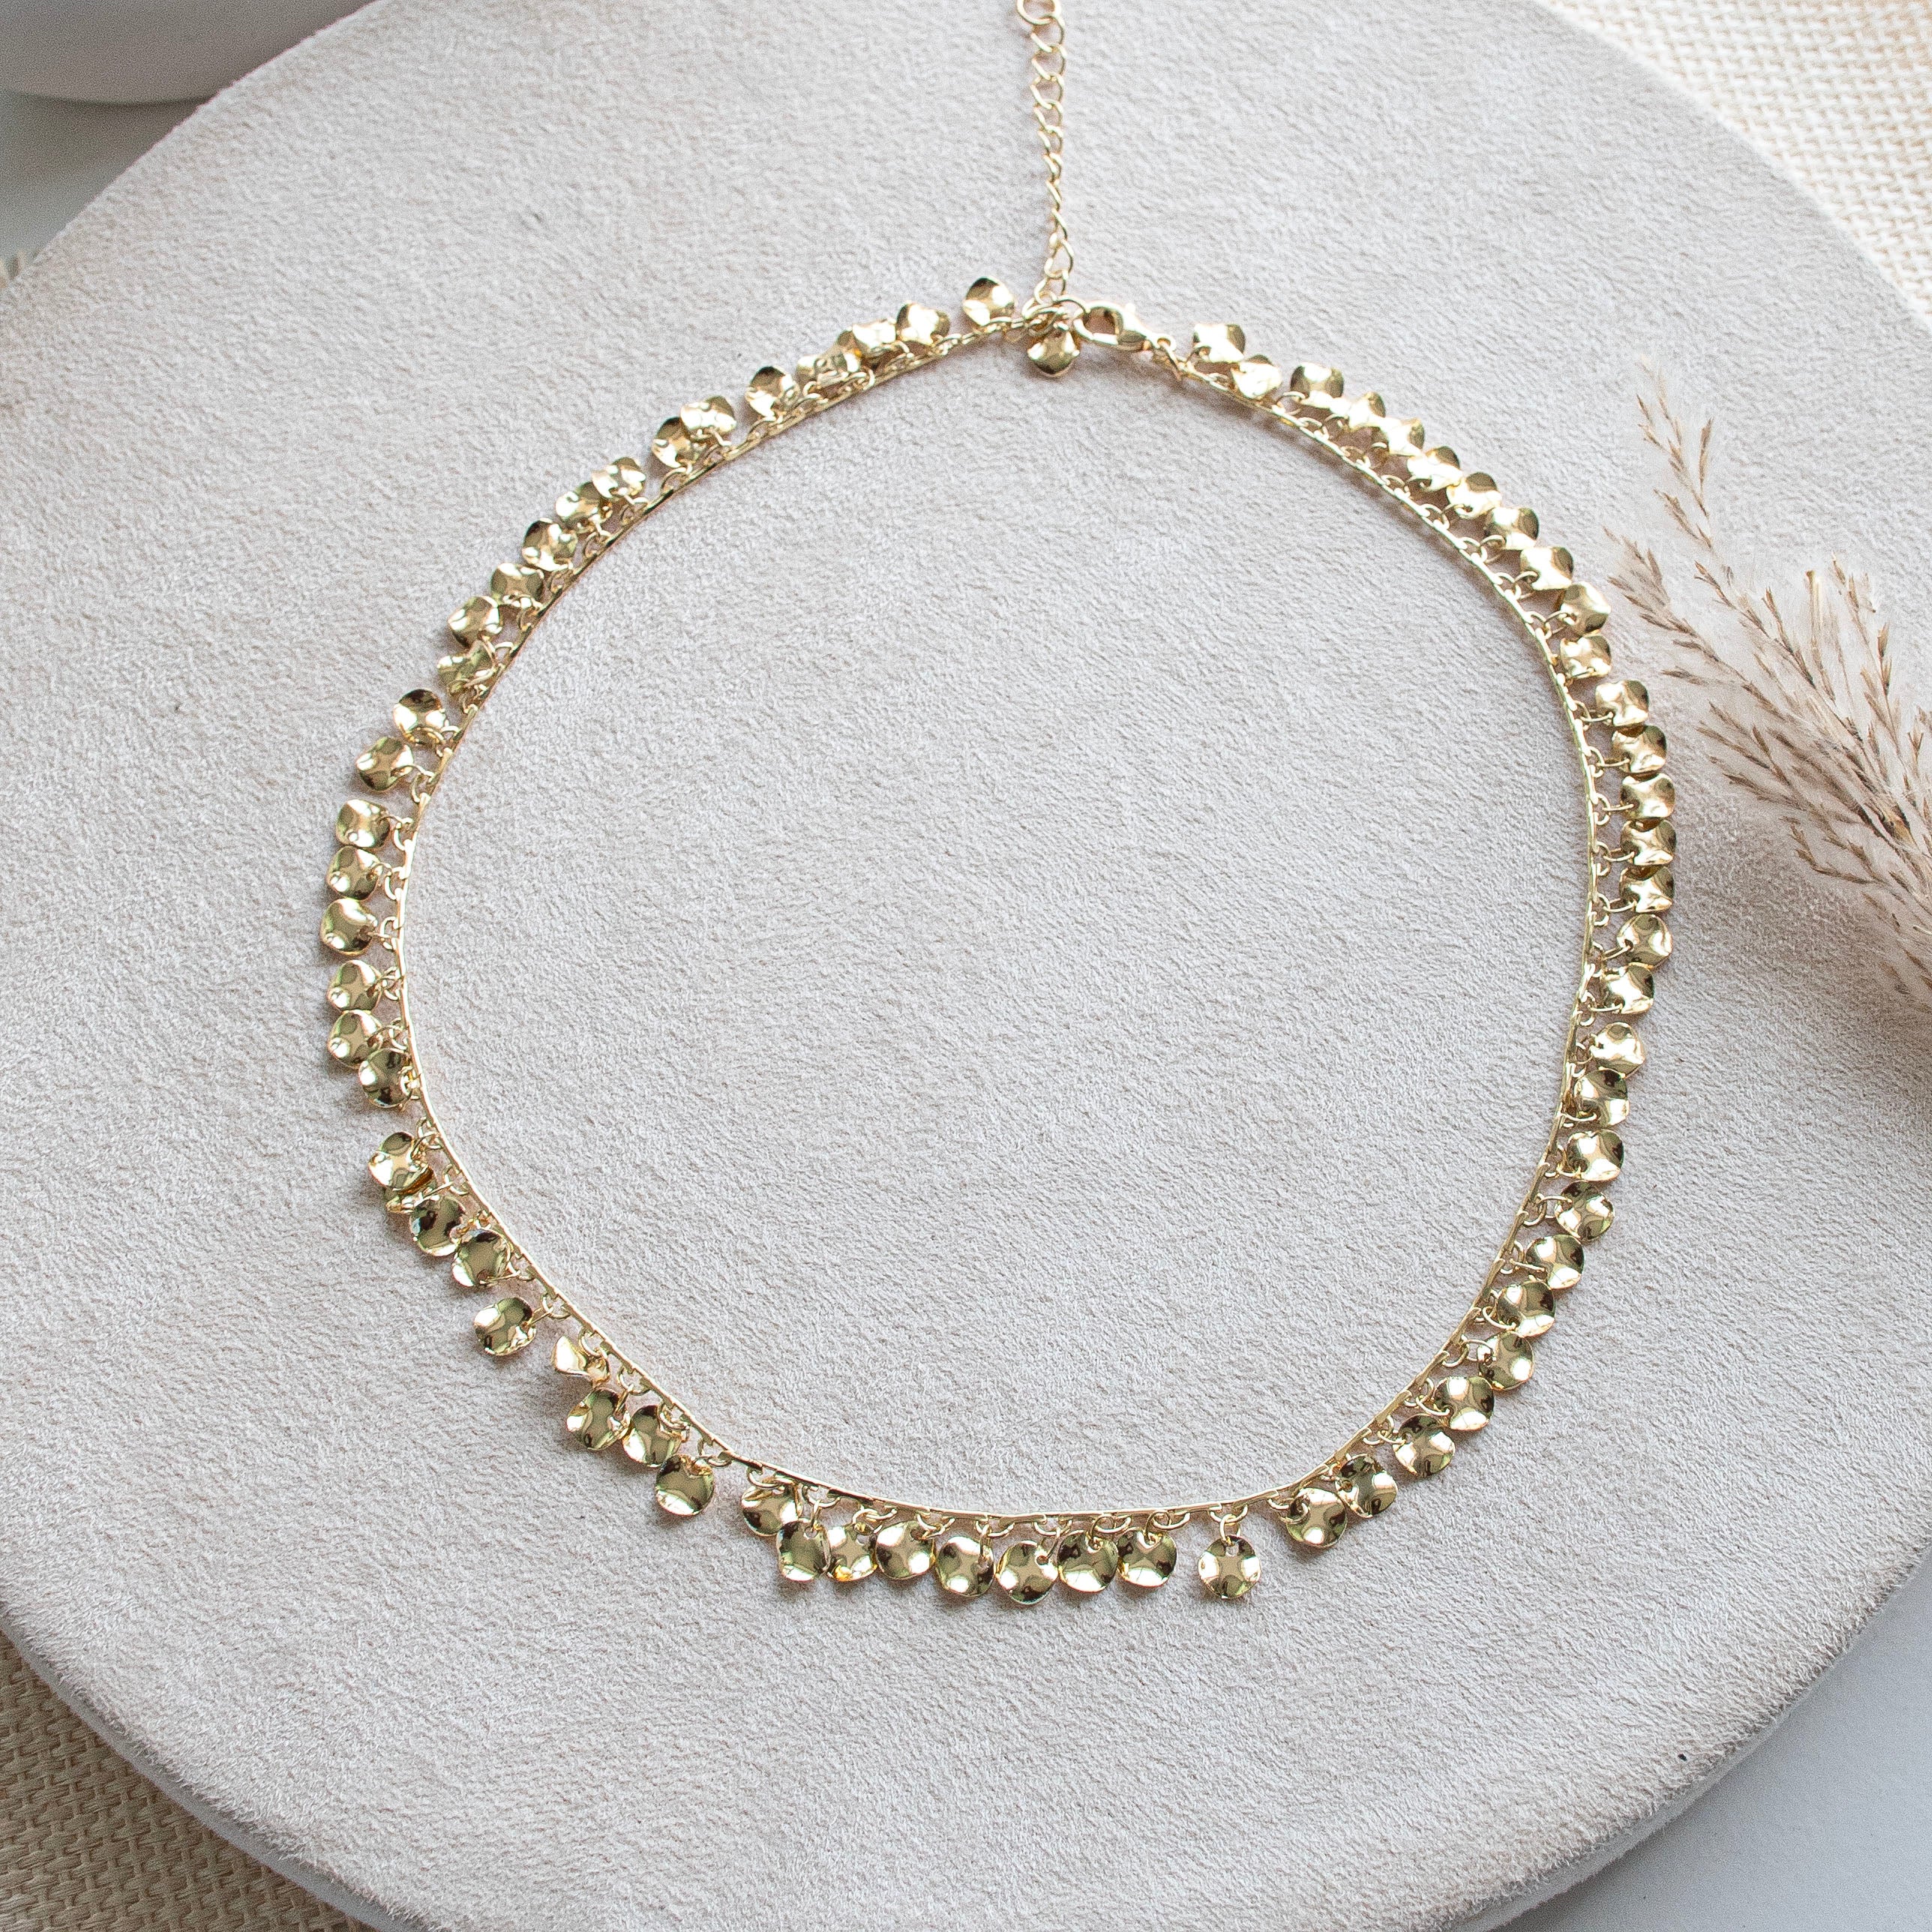 Gilded Jingle Chic Necklace